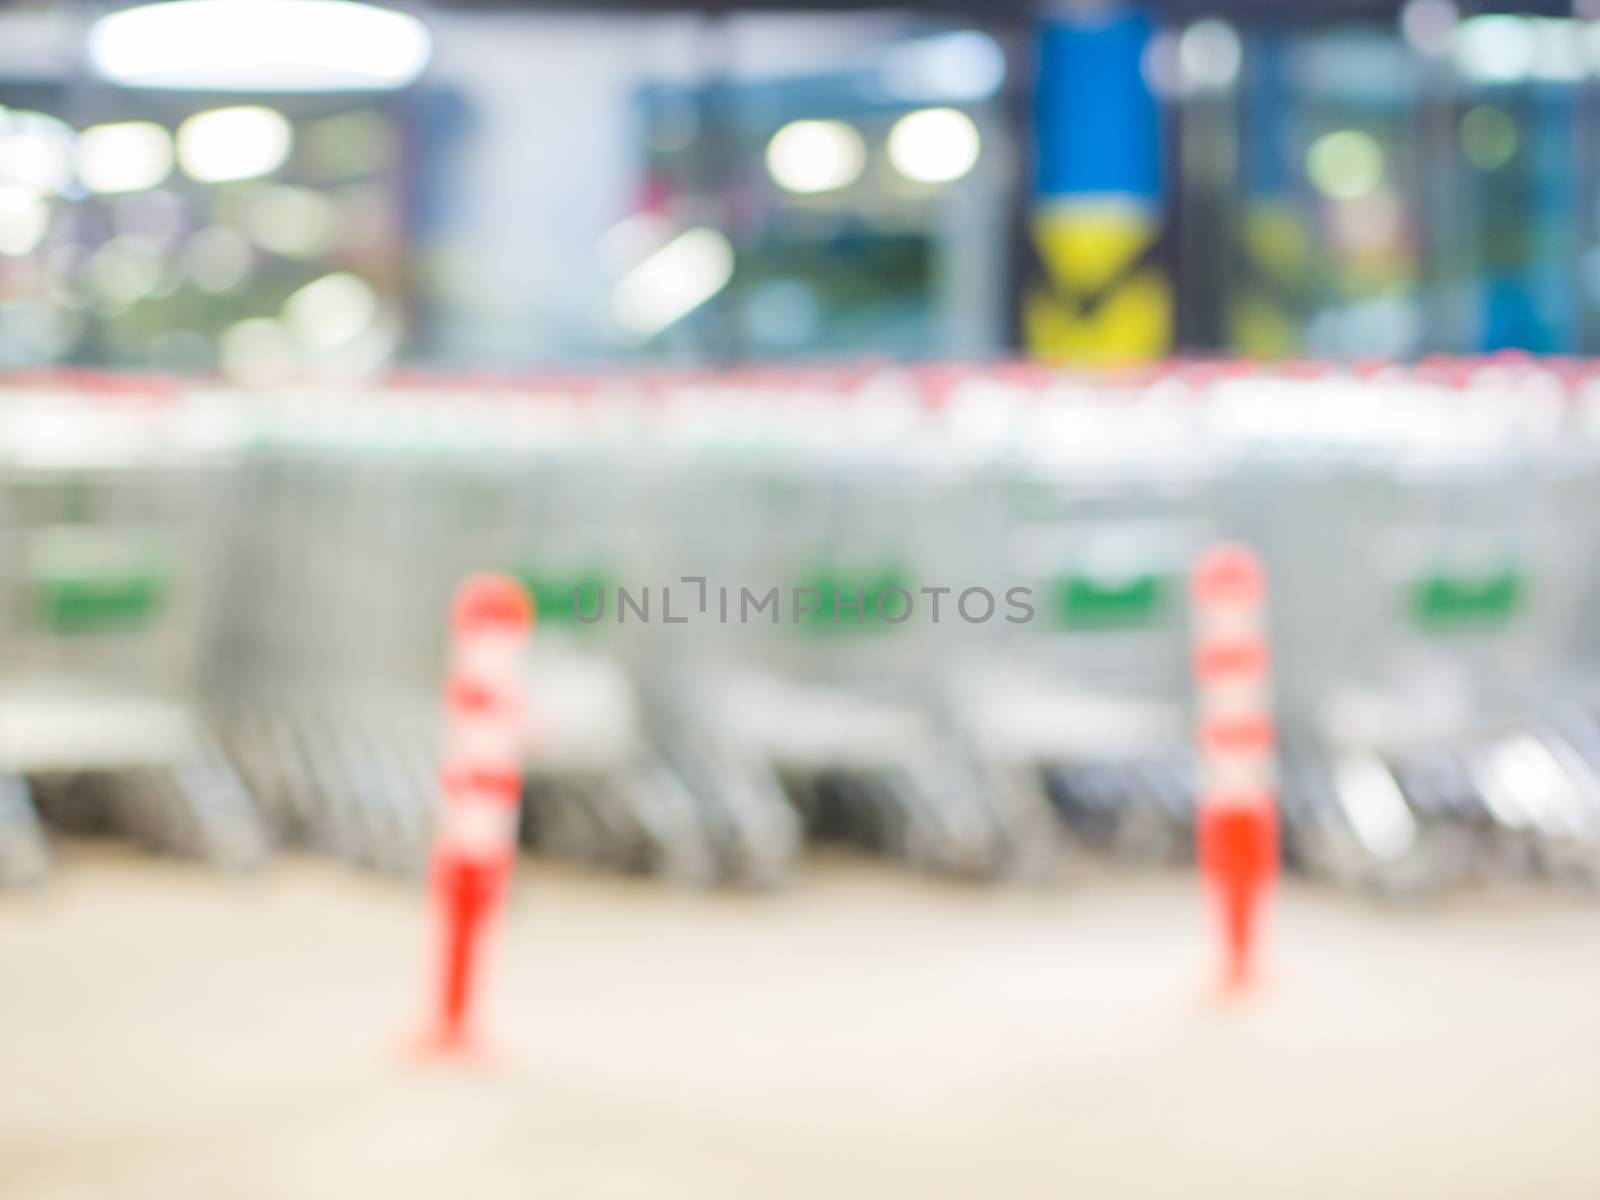 Blurred shopping carts on a parking lot by fascinadora